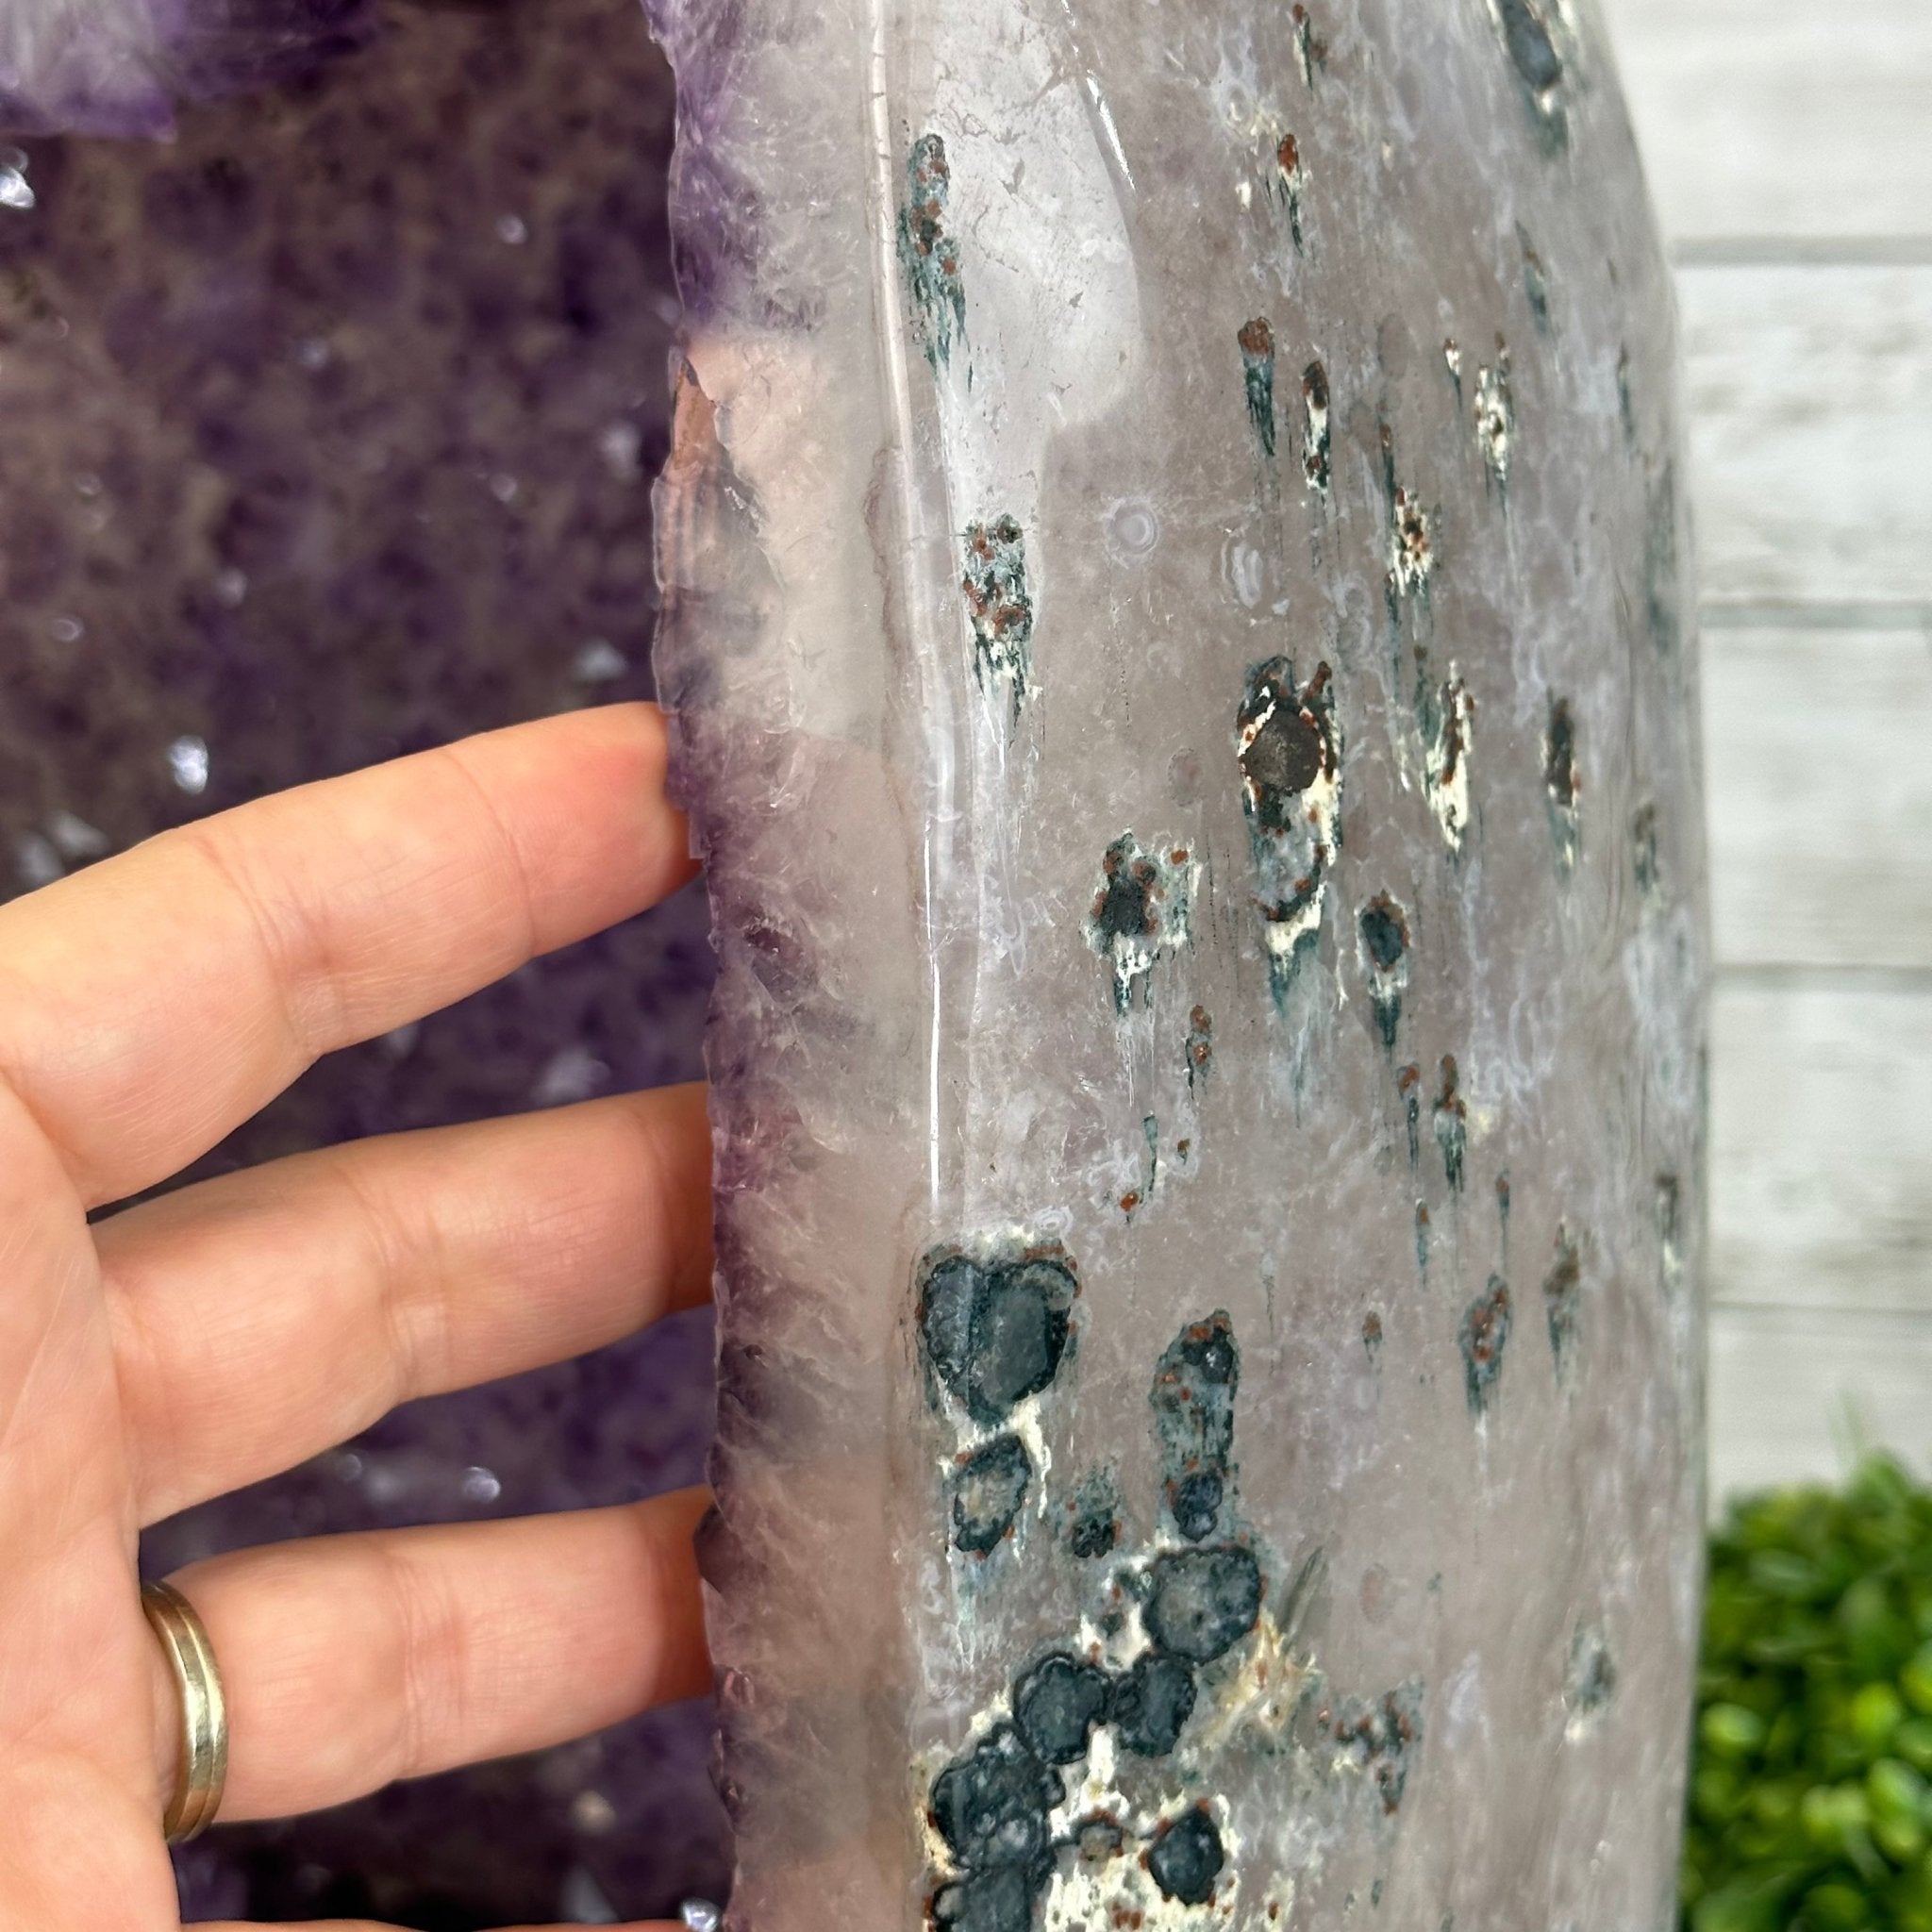 Extra Quality Polished Brazilian Amethyst Cathedral, 62.6 lbs & 16.25" tall Model #5602-0161 by Brazil Gems - Brazil GemsBrazil GemsExtra Quality Polished Brazilian Amethyst Cathedral, 62.6 lbs & 16.25" tall Model #5602-0161 by Brazil GemsPolished Cathedrals5602-0161